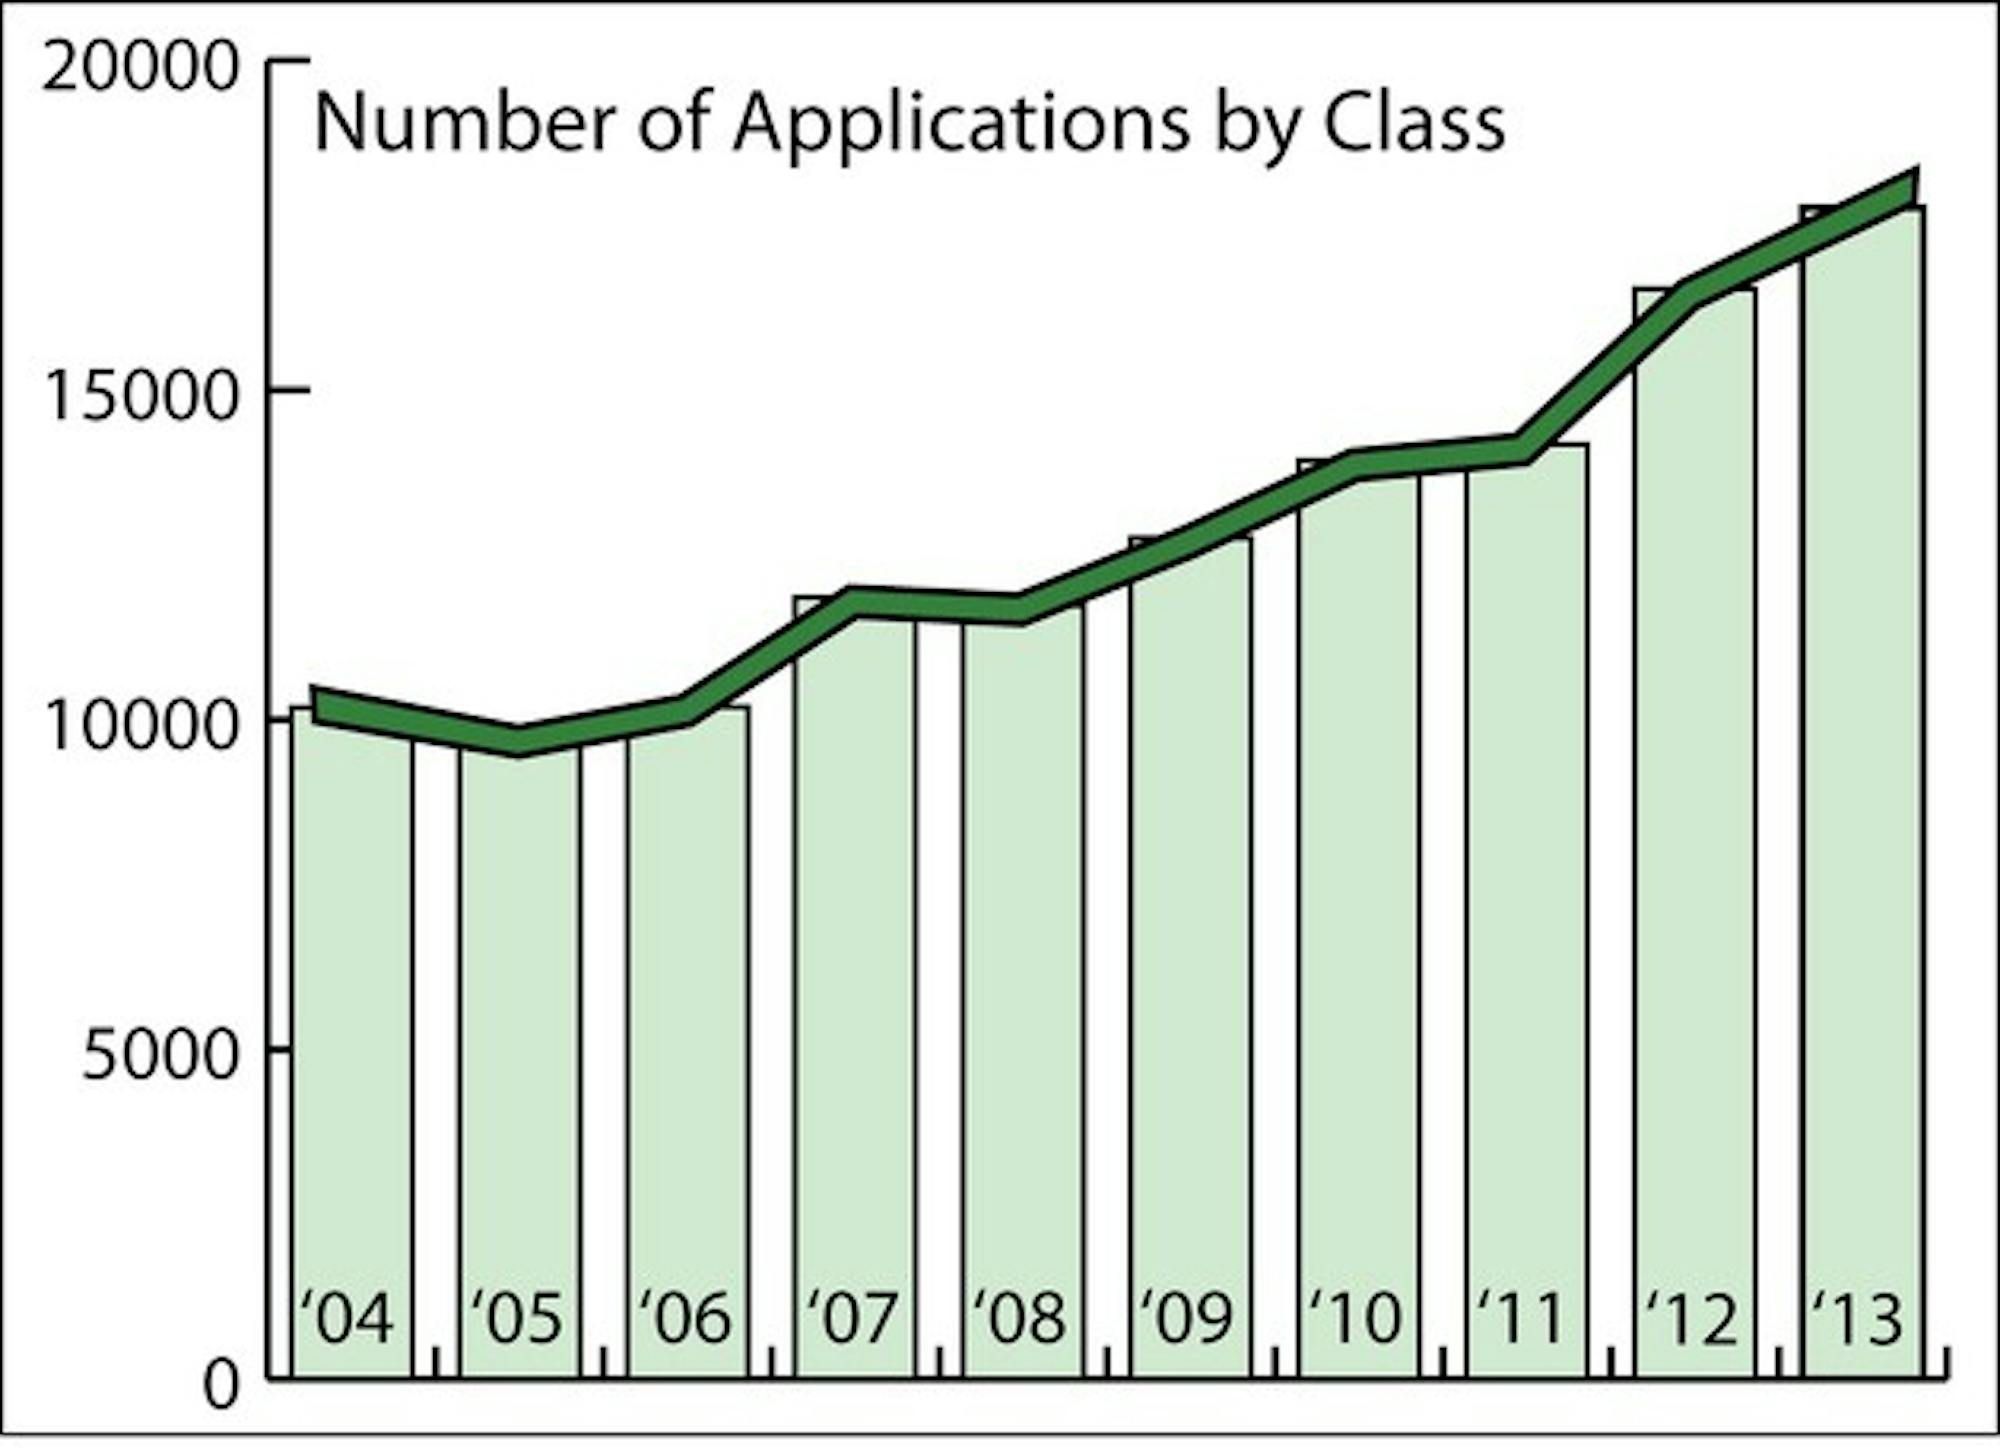 The College received a record number of applications this year.